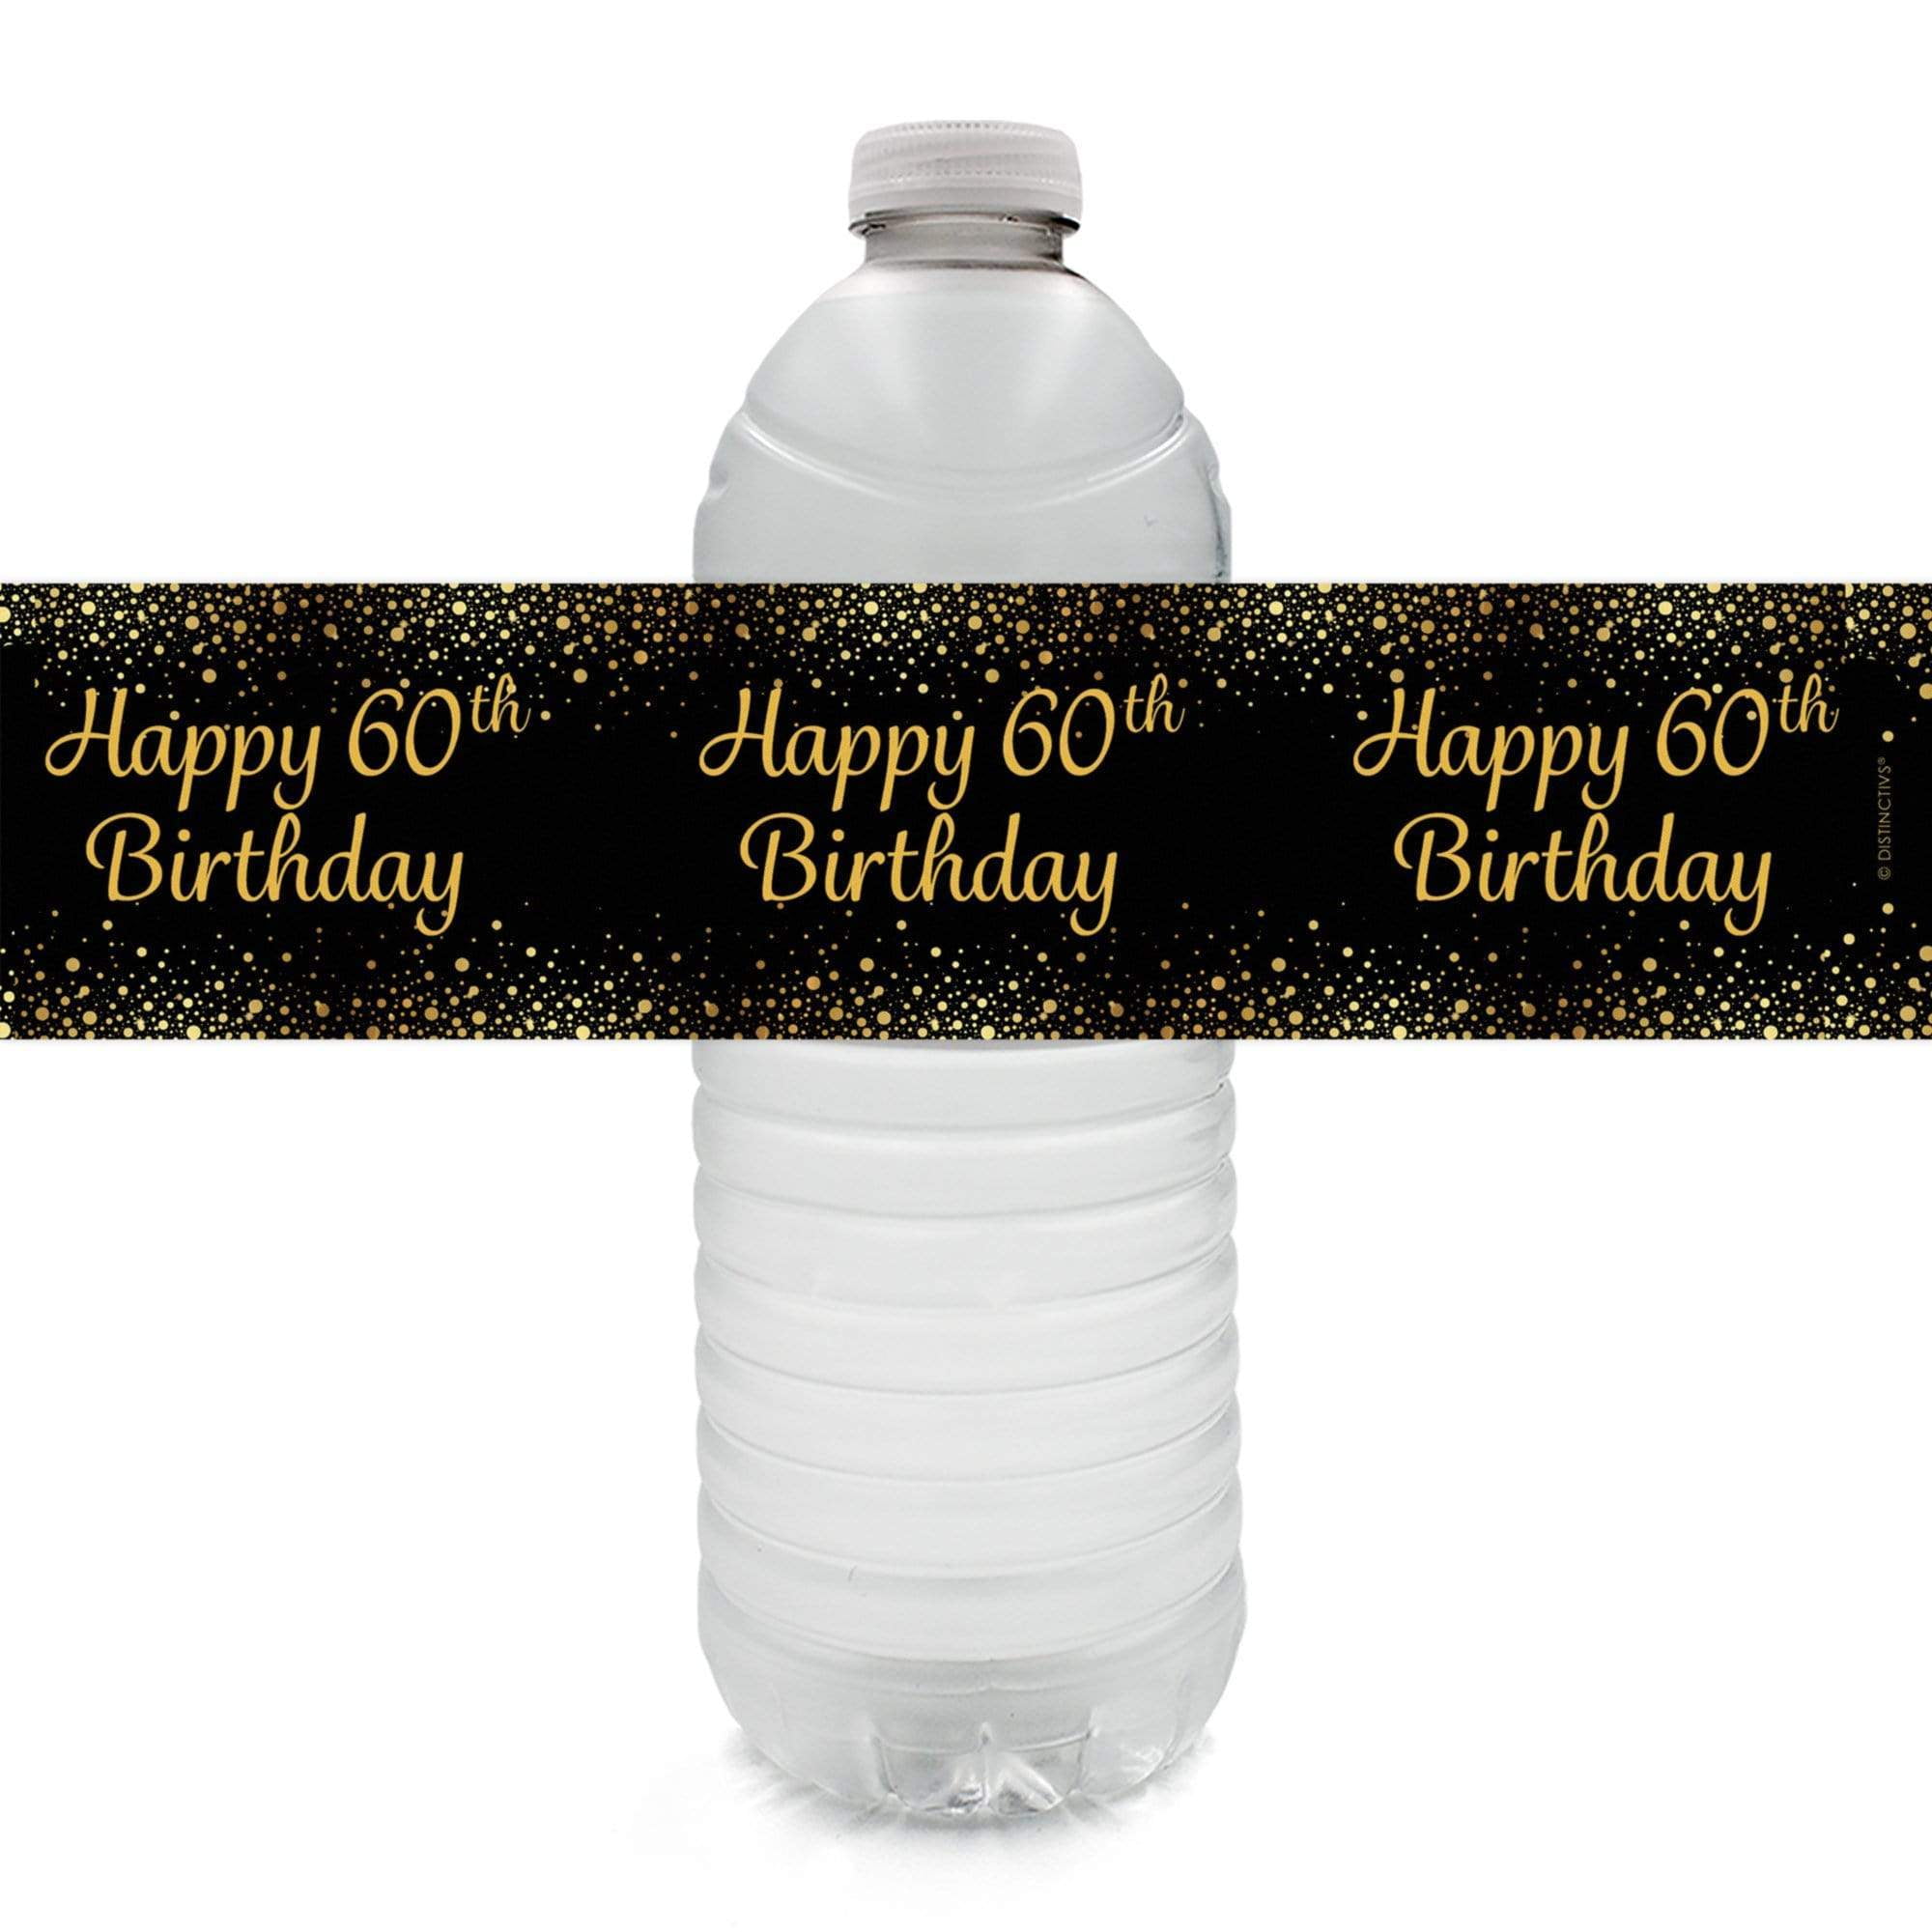 SWEET SIXTEEN SILVER & BLACK BIRTHDAY PARTY FAVORS WATER BOTTLE LABELS WRAPPERS 